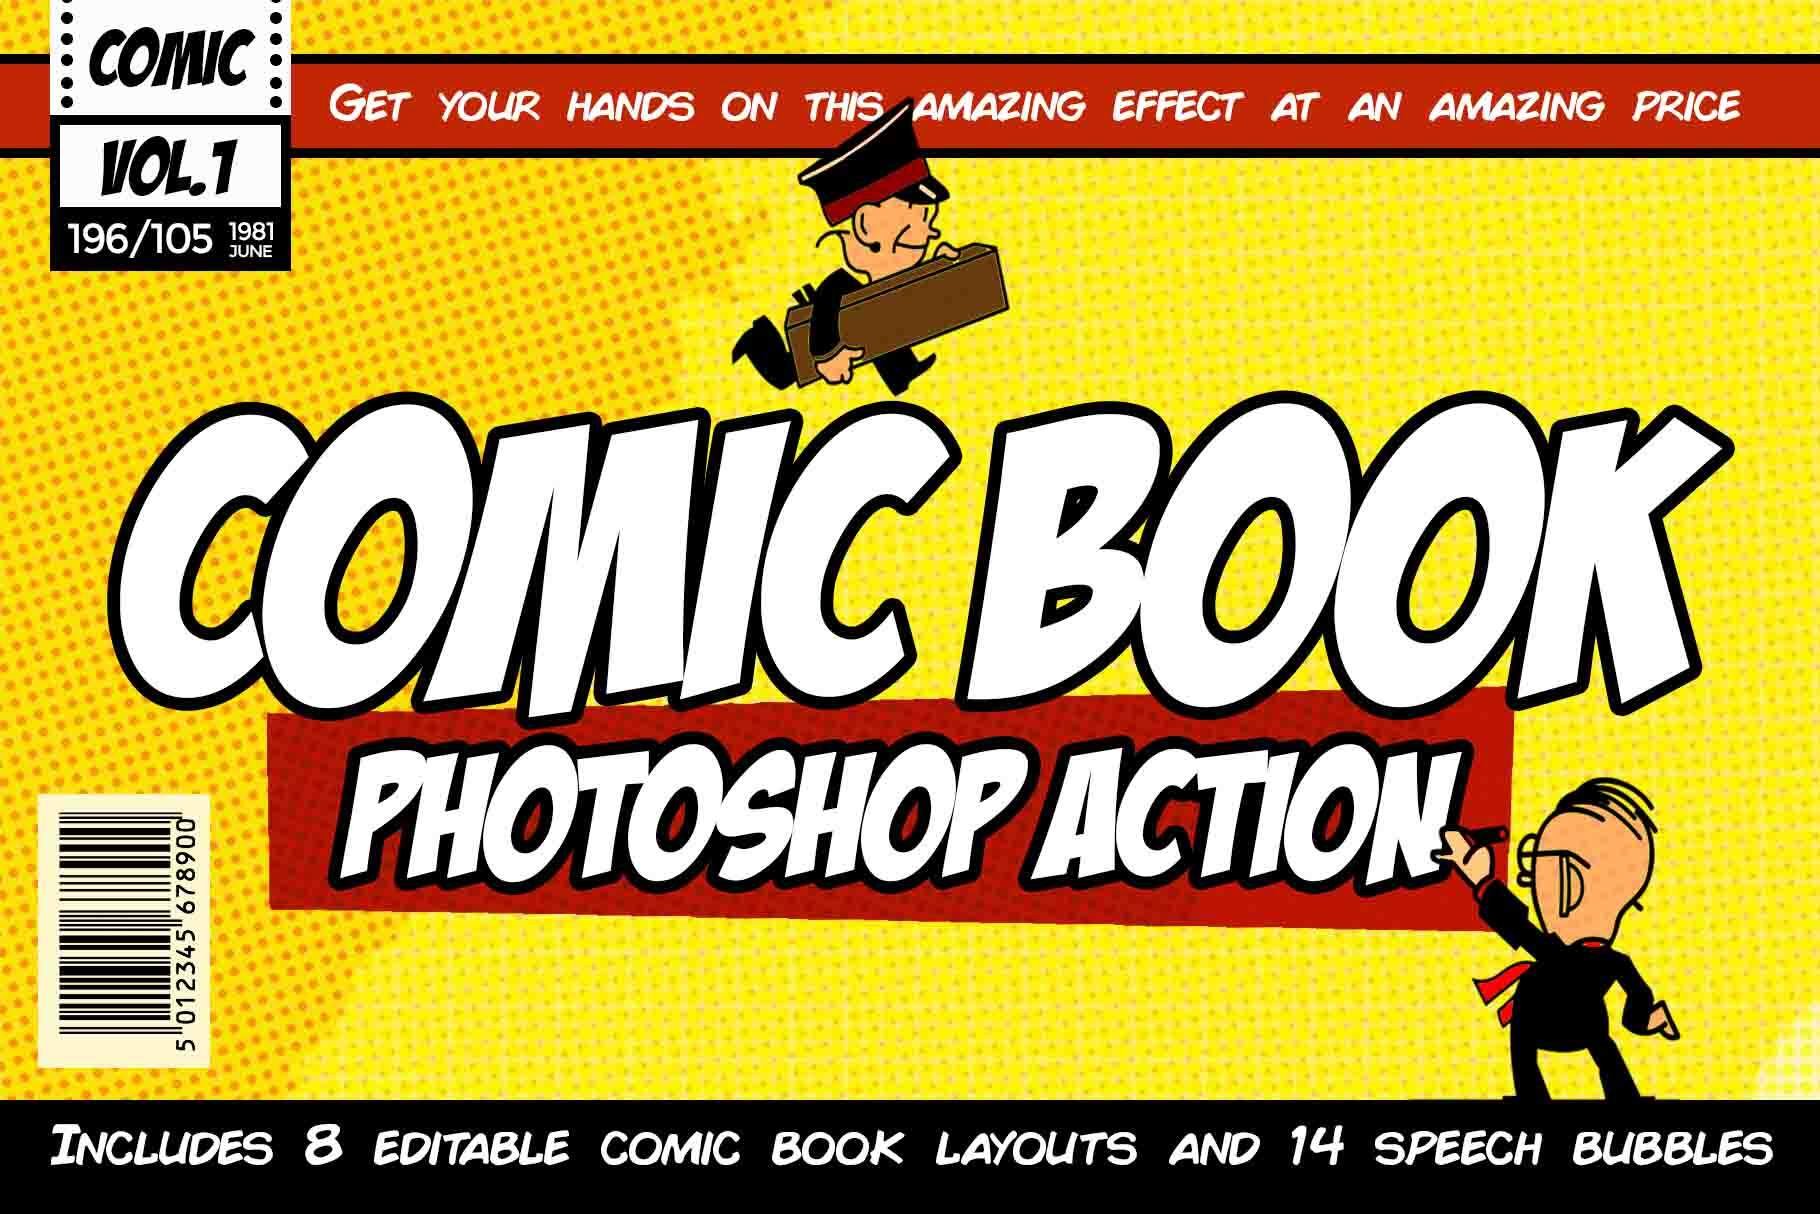 Comic Book Photoshop Action Kitcover image.